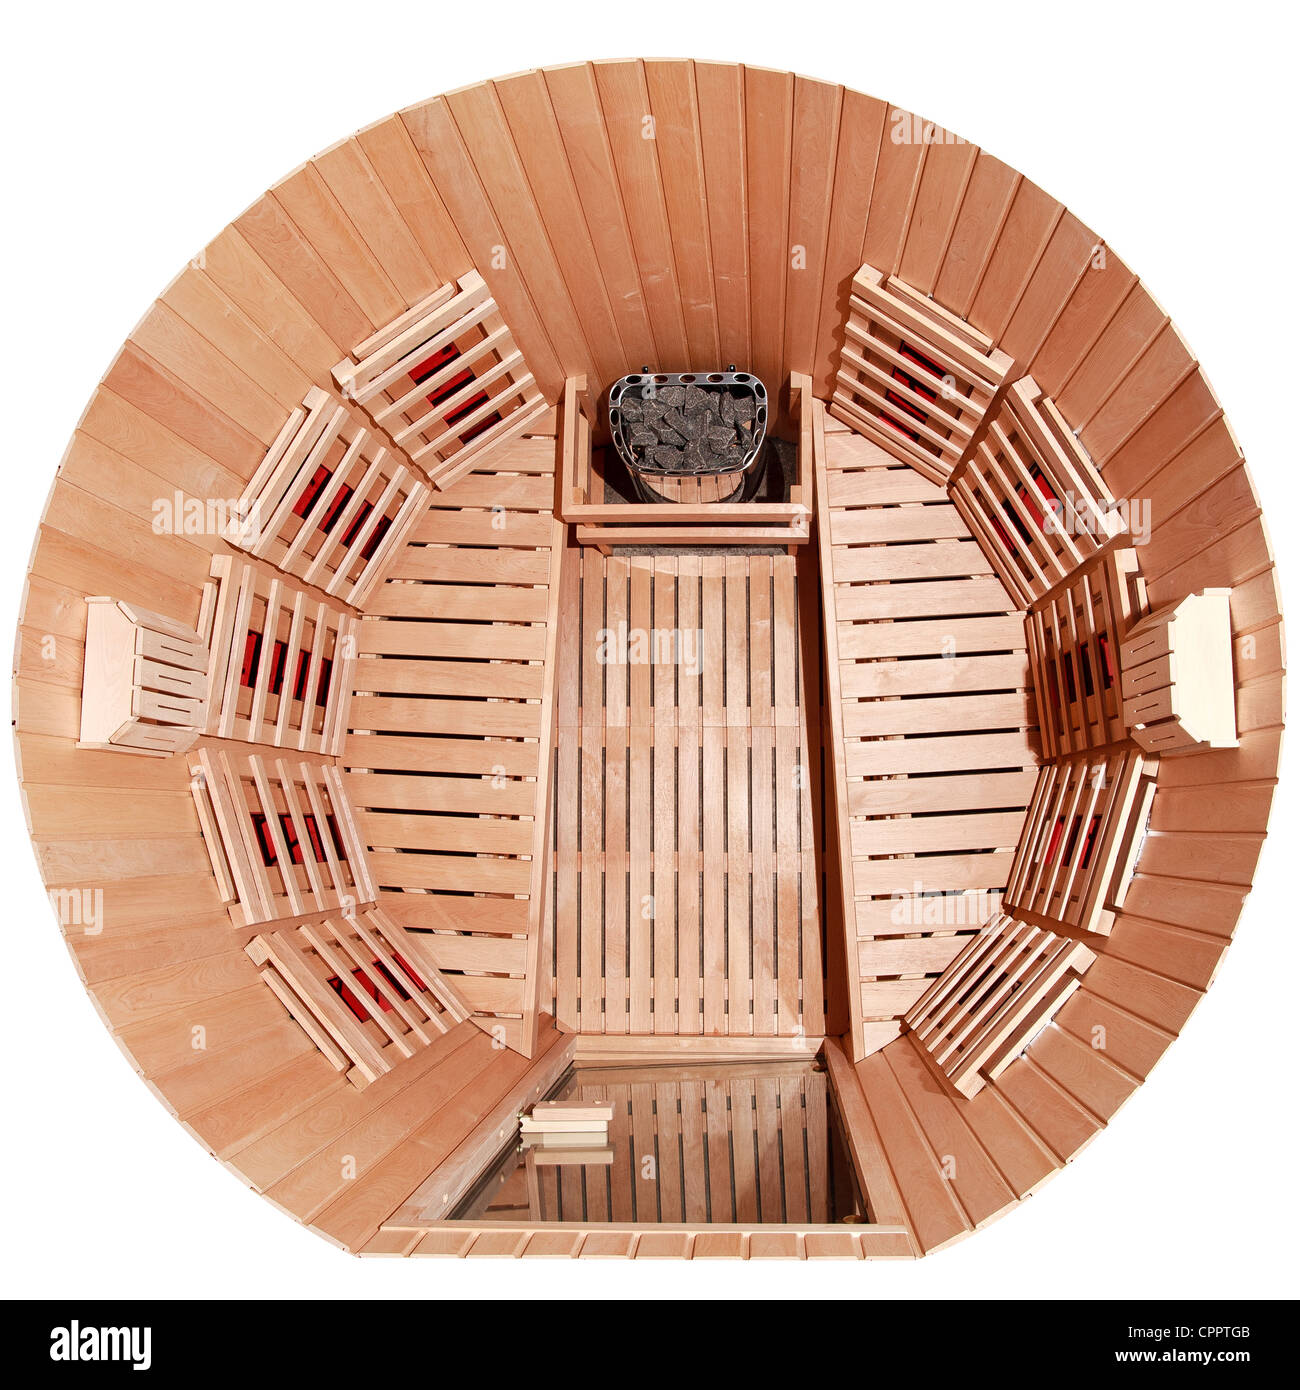 top view of infrared sauna Stock Photo